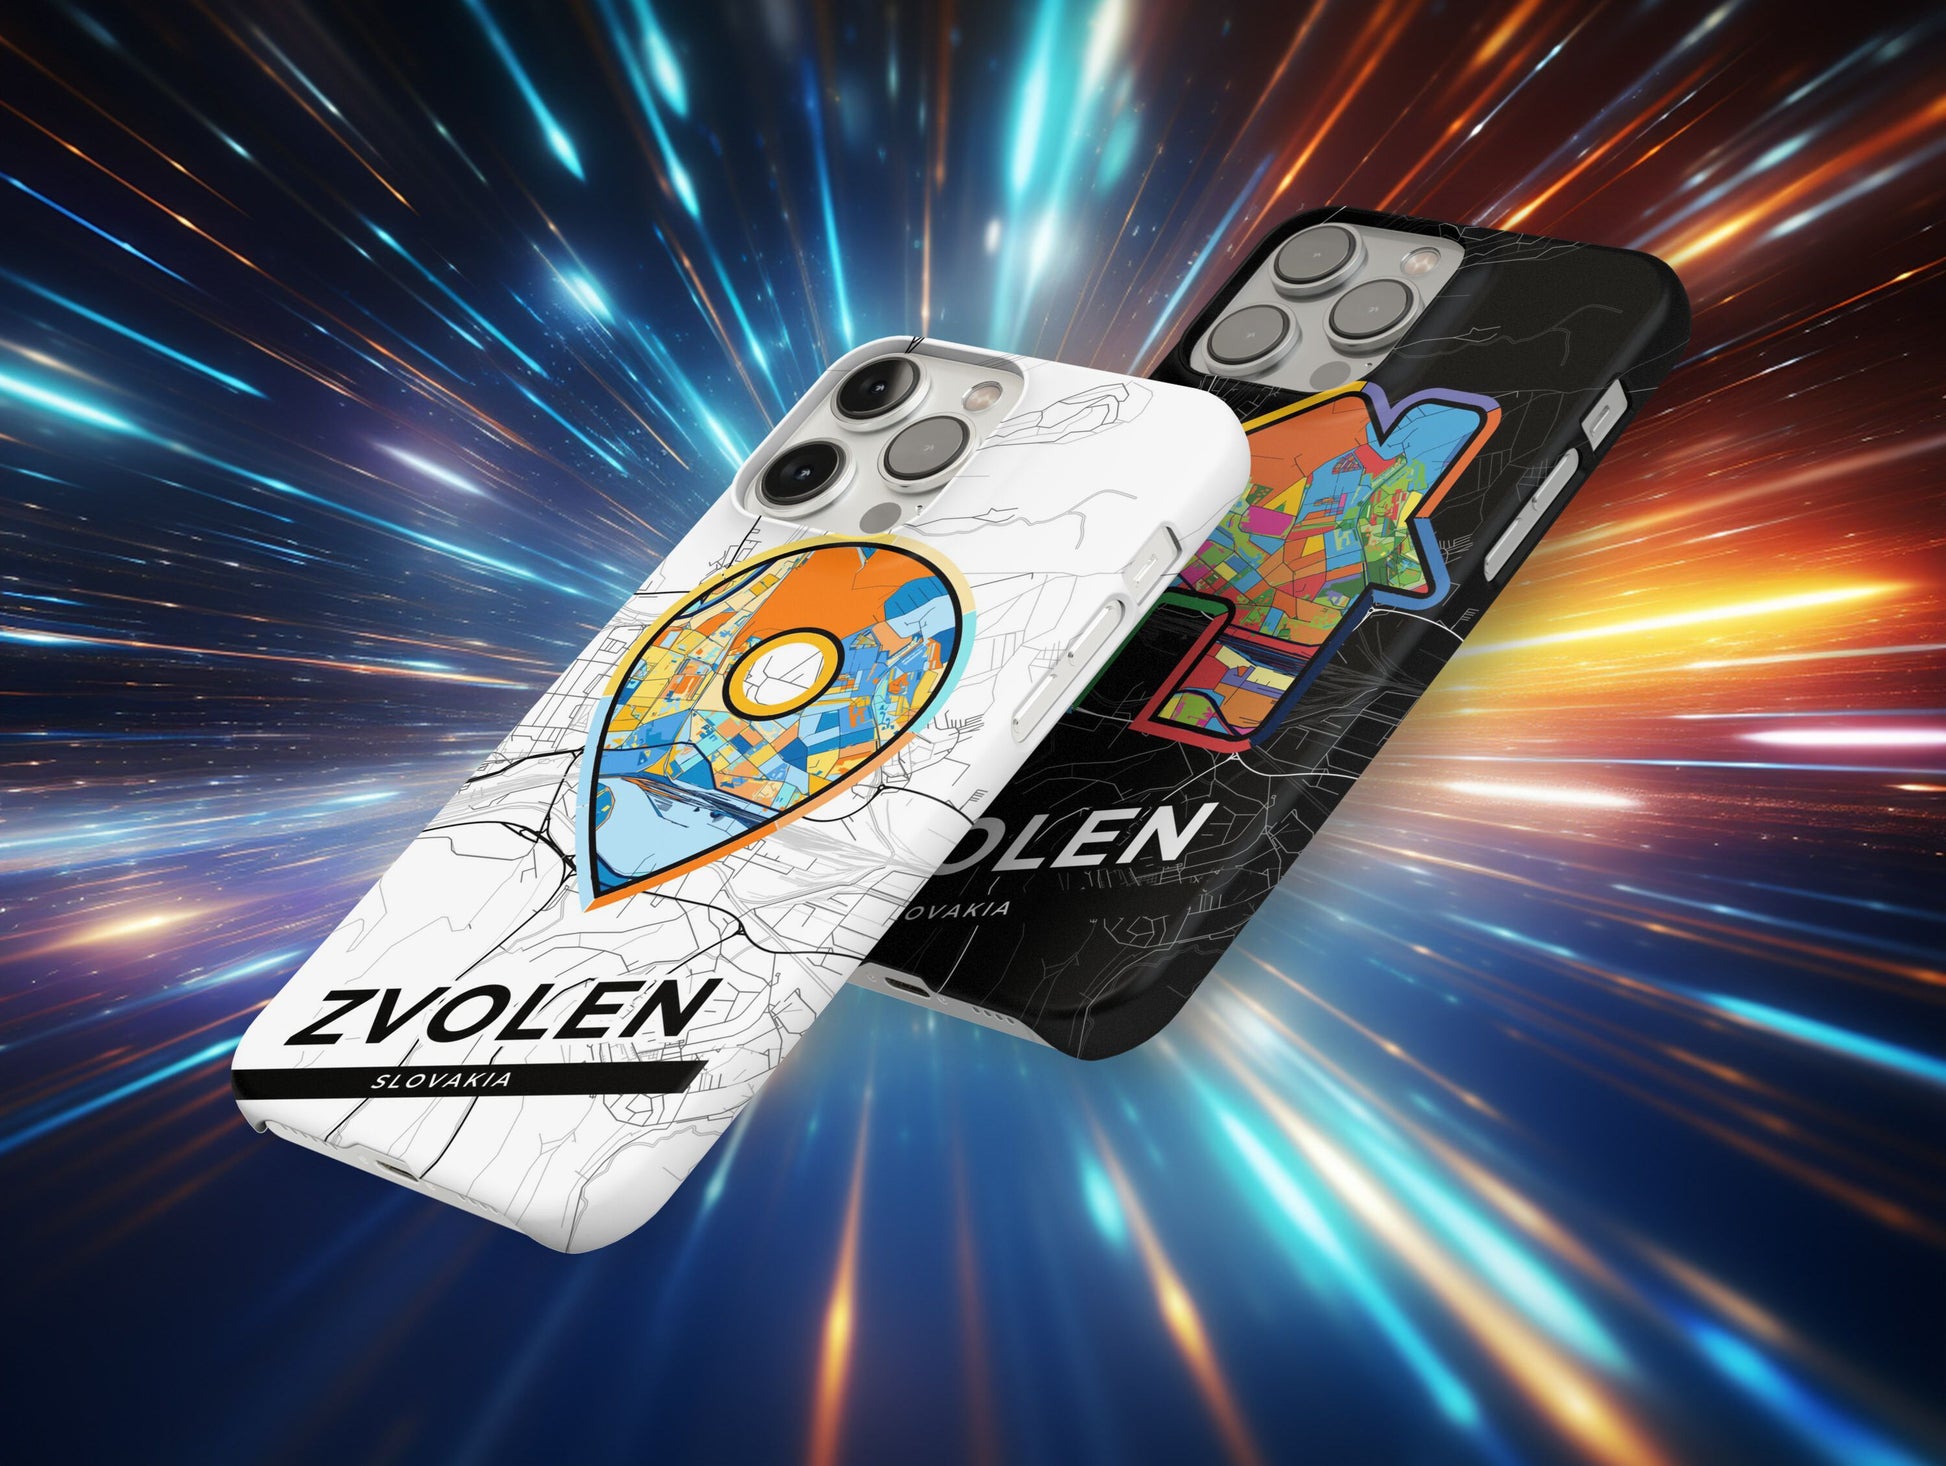 Zvolen Slovakia slim phone case with colorful icon. Birthday, wedding or housewarming gift. Couple match cases.